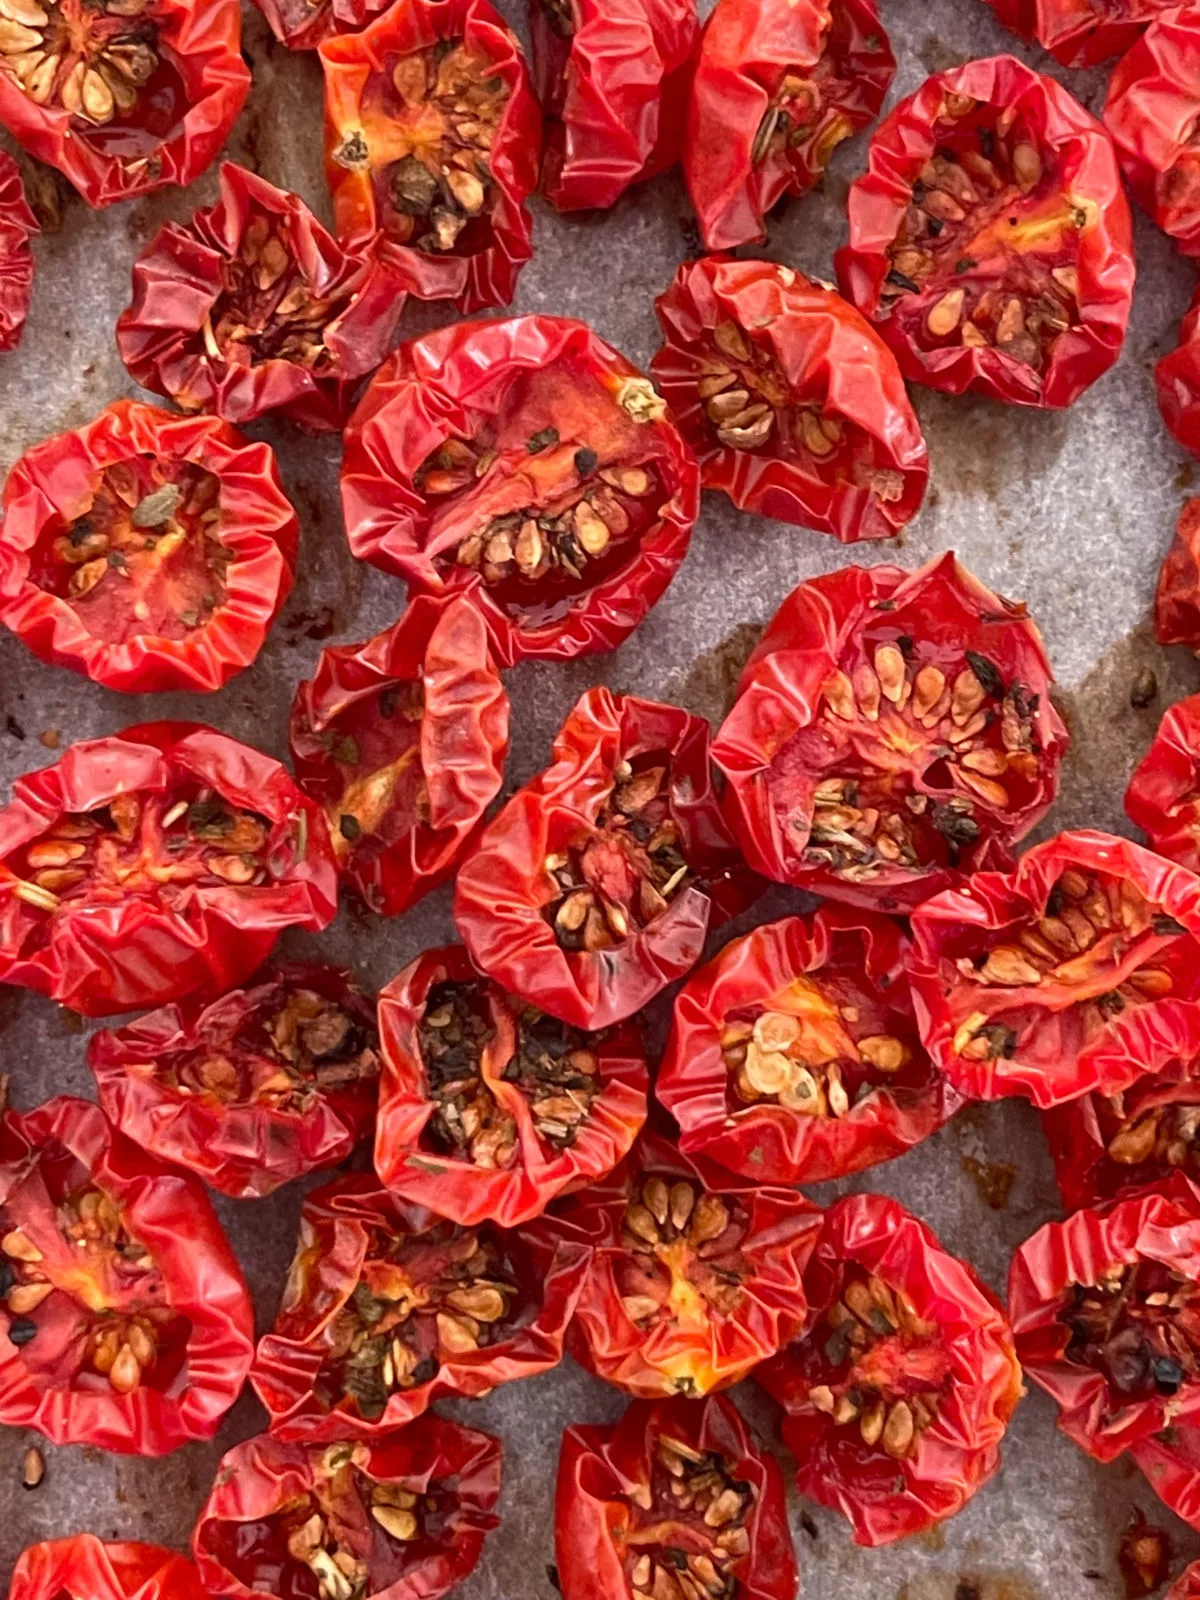 sun-dried tomatoes on a baking tray.